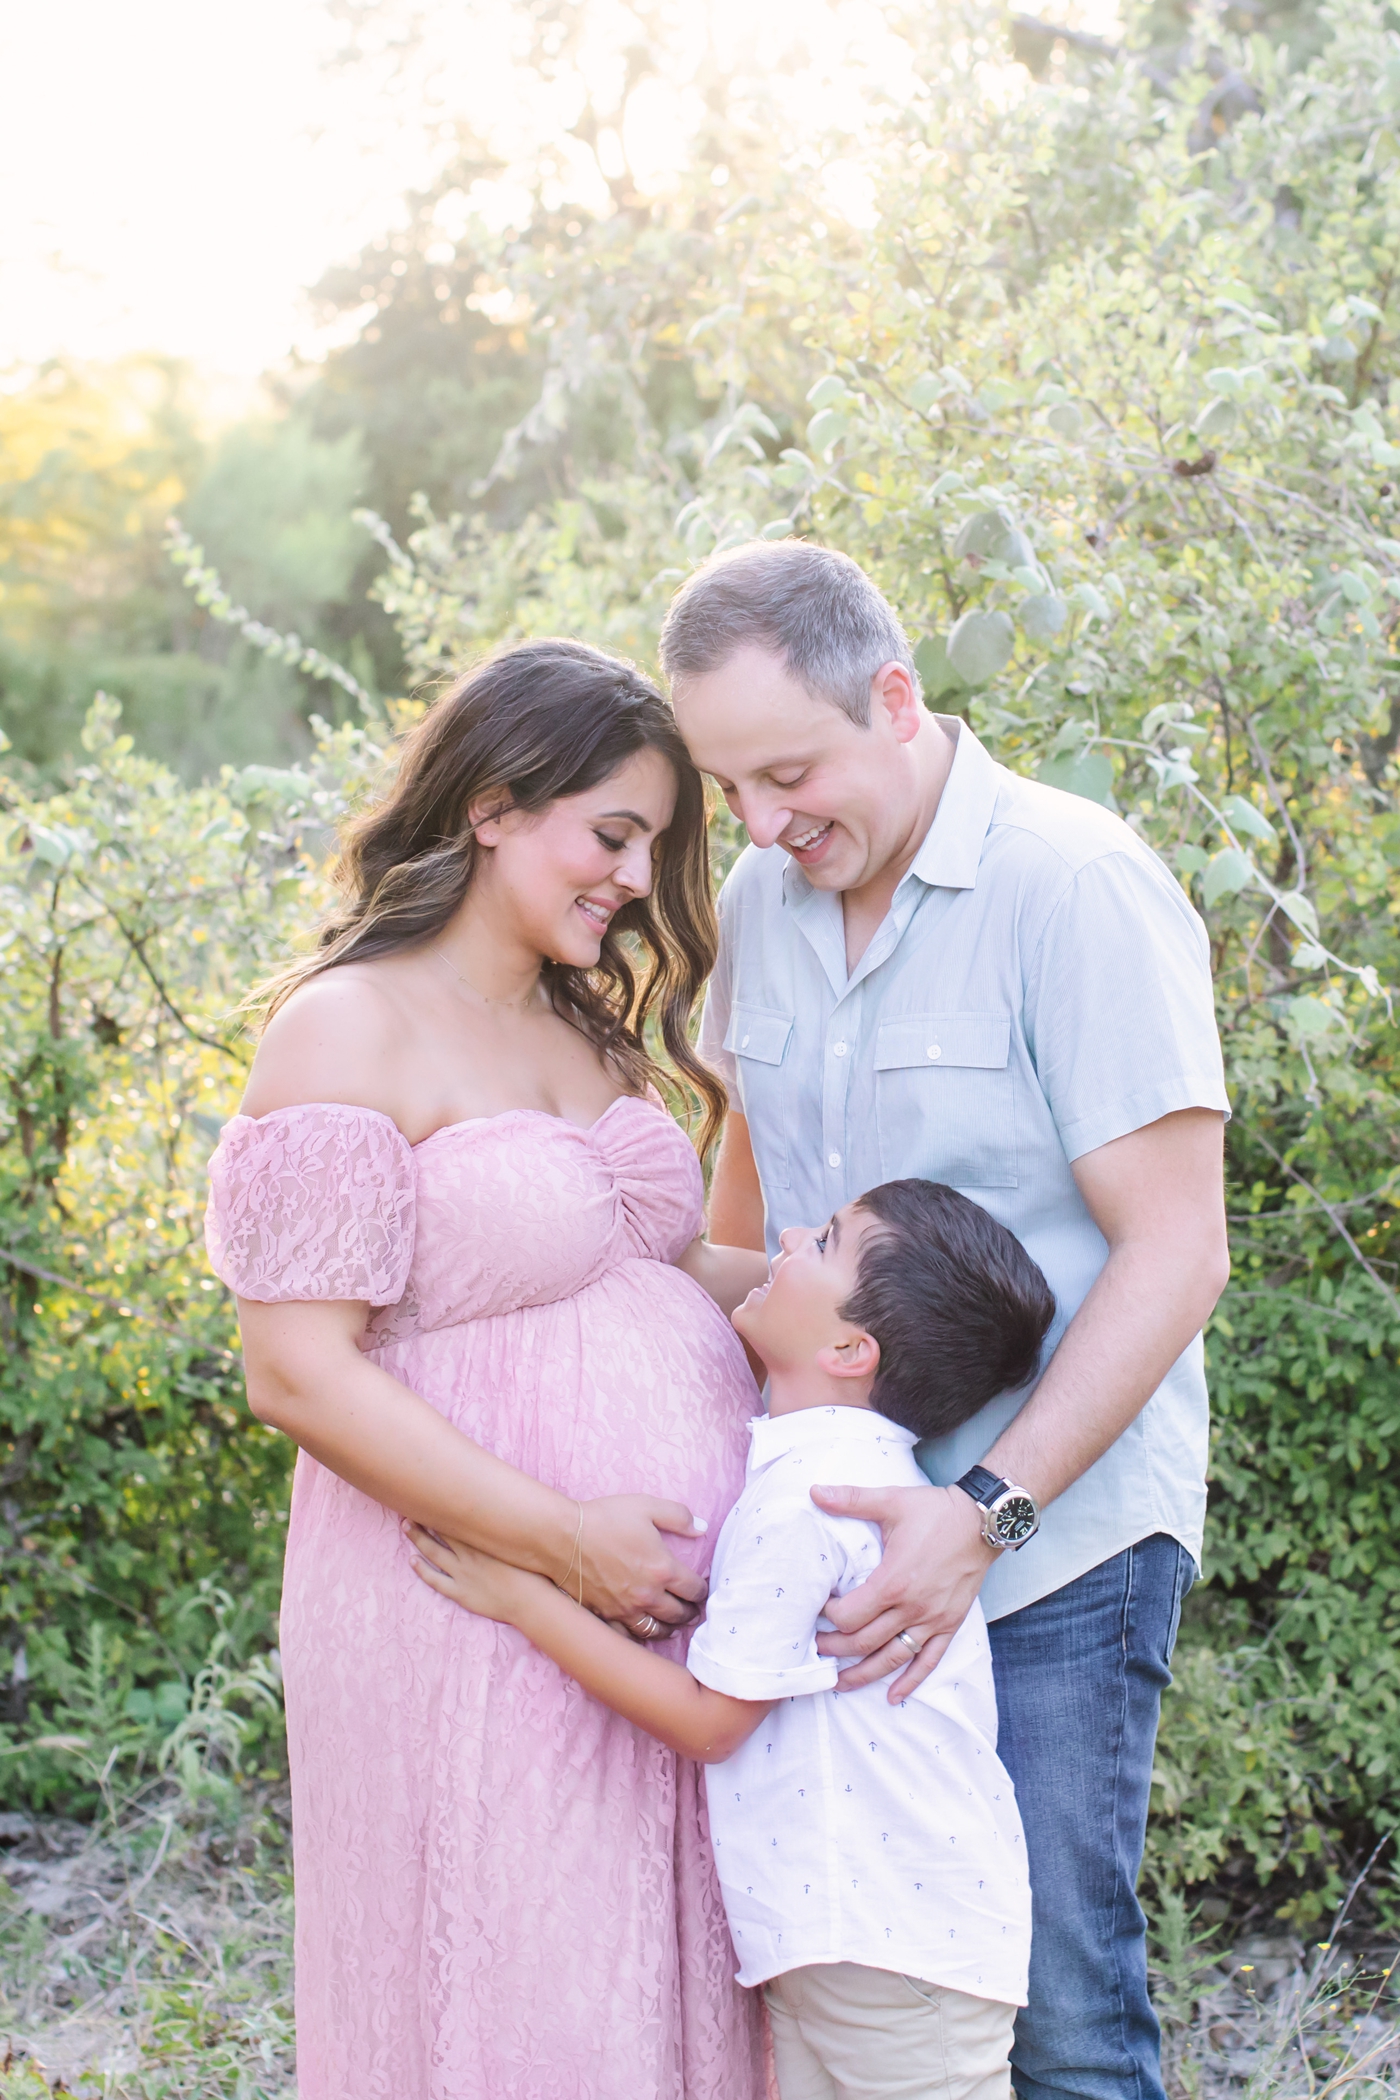 Sunlit portrait of family smiling at each other during maternity session. Photo by Sana Ahmed Photography.